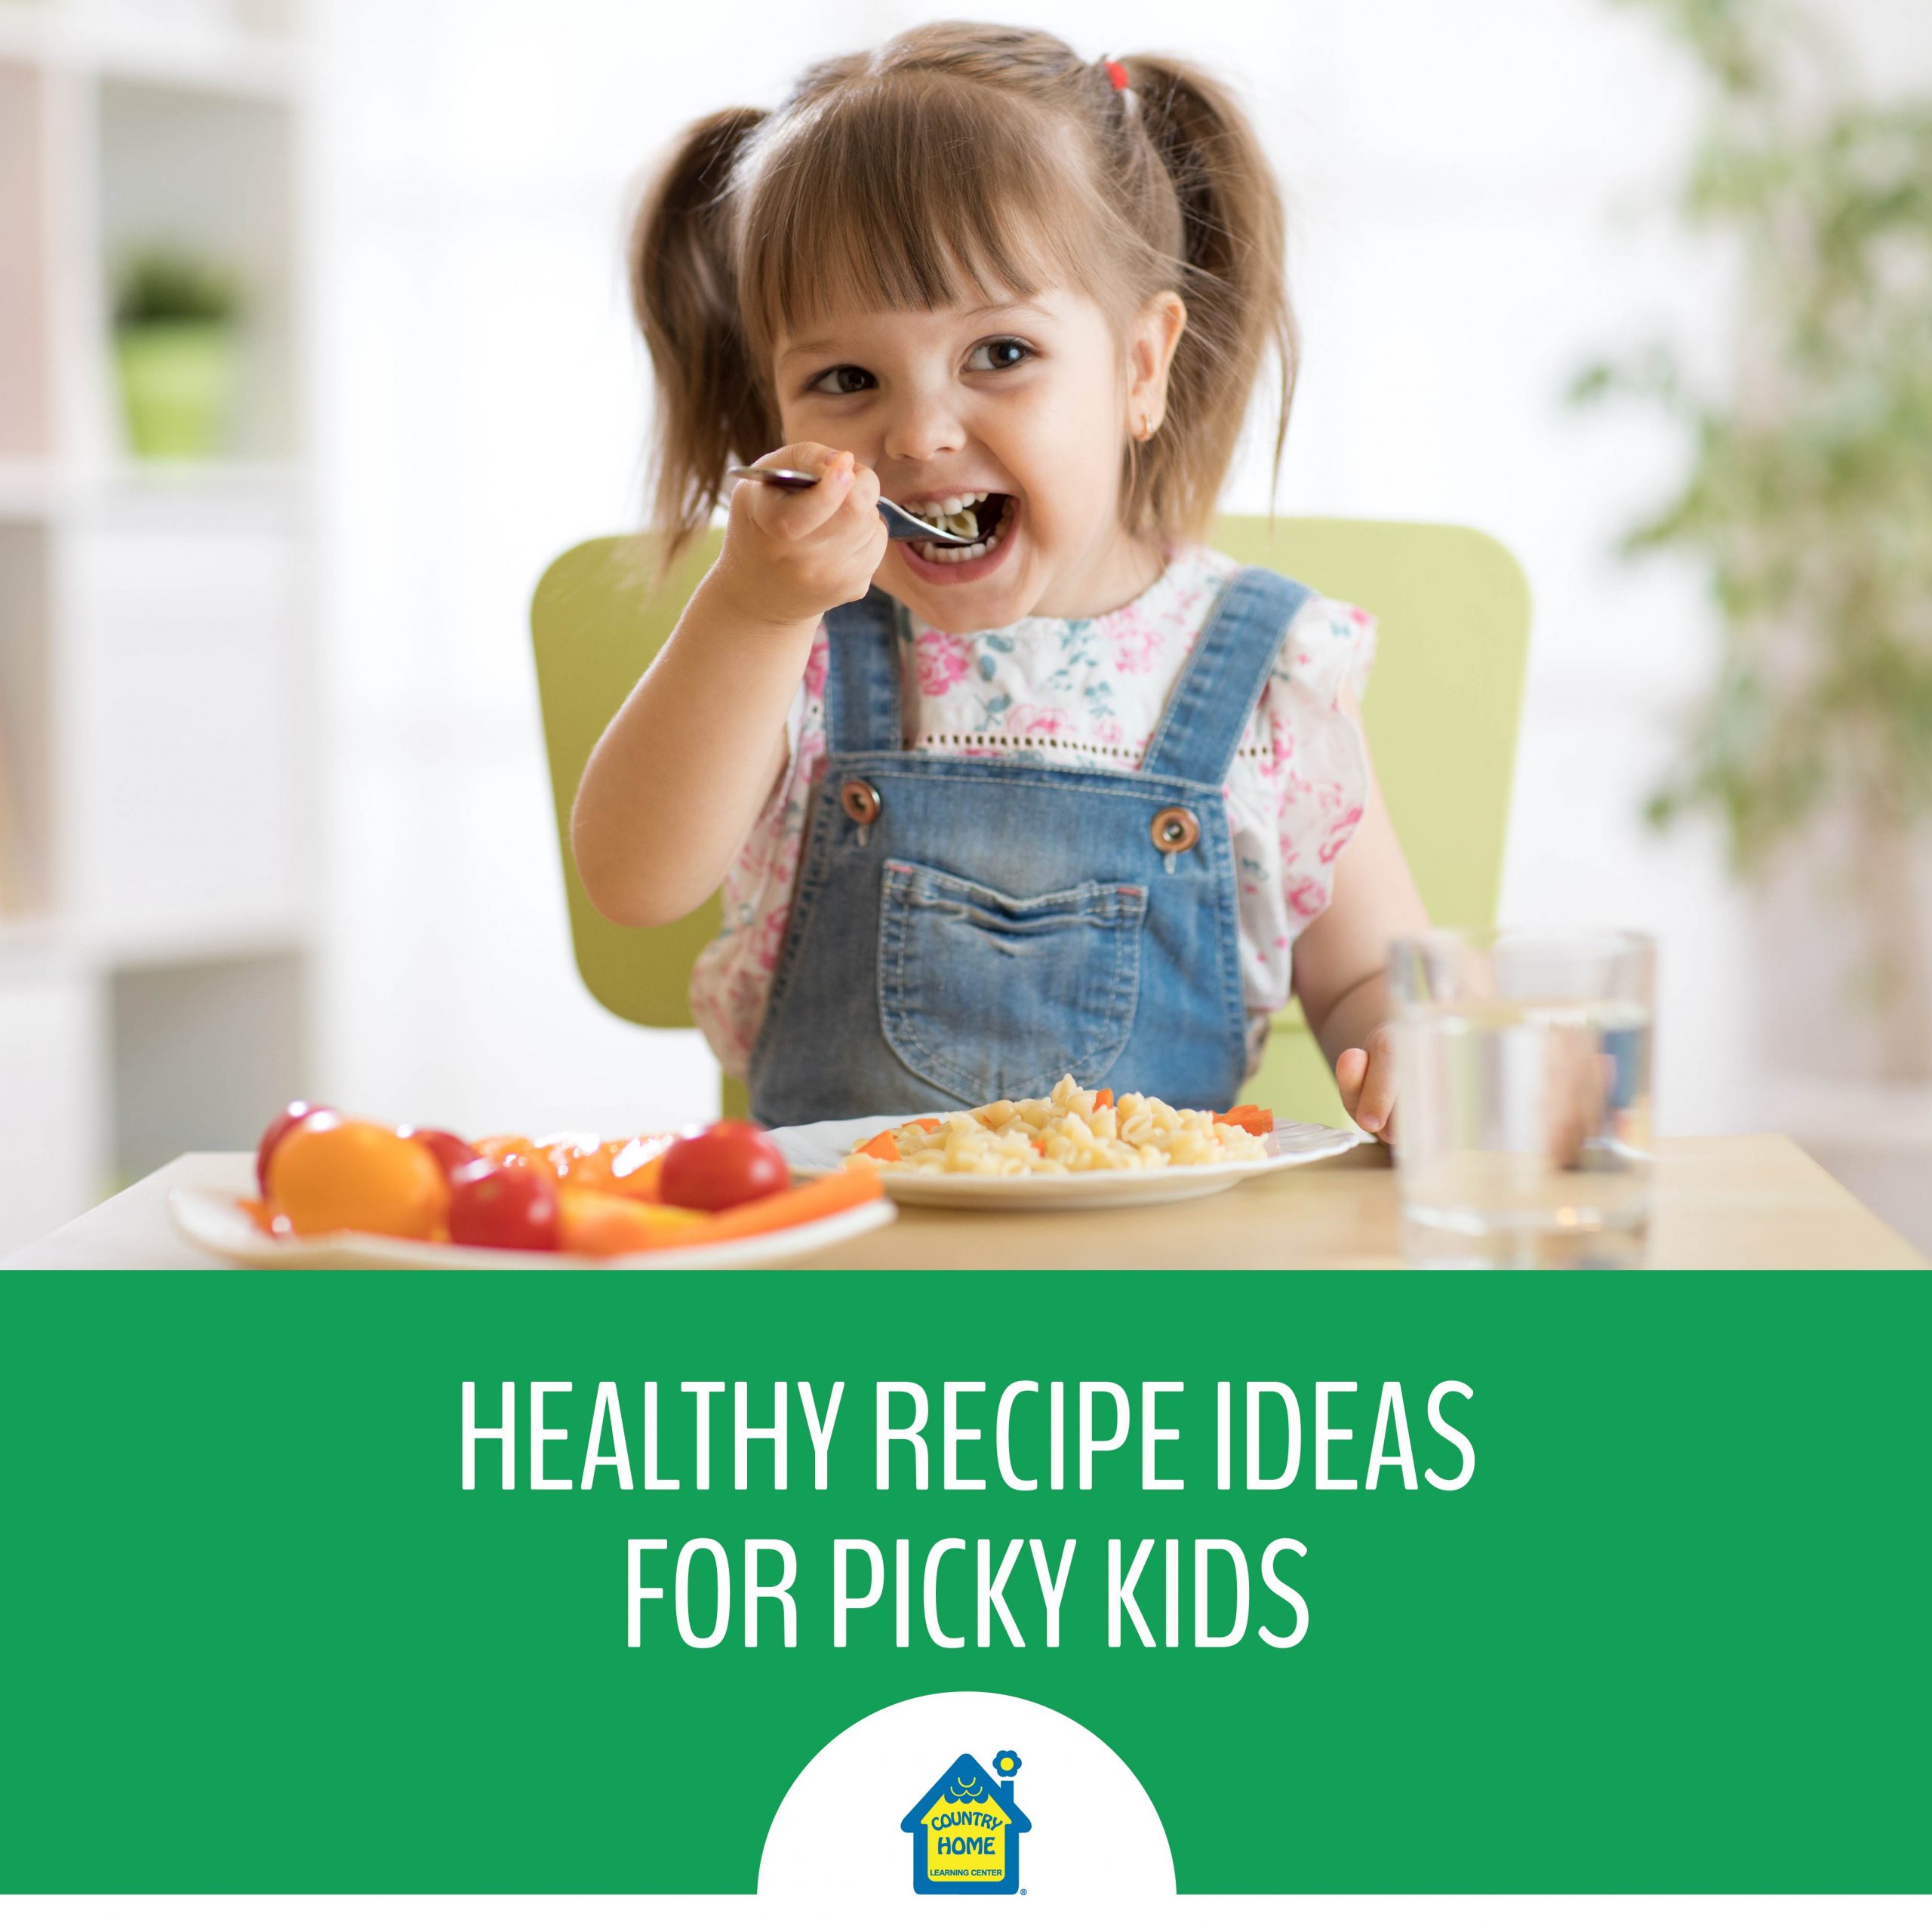 Healthy Recipe Ideas for Picky Kids - Country Home Learning Center